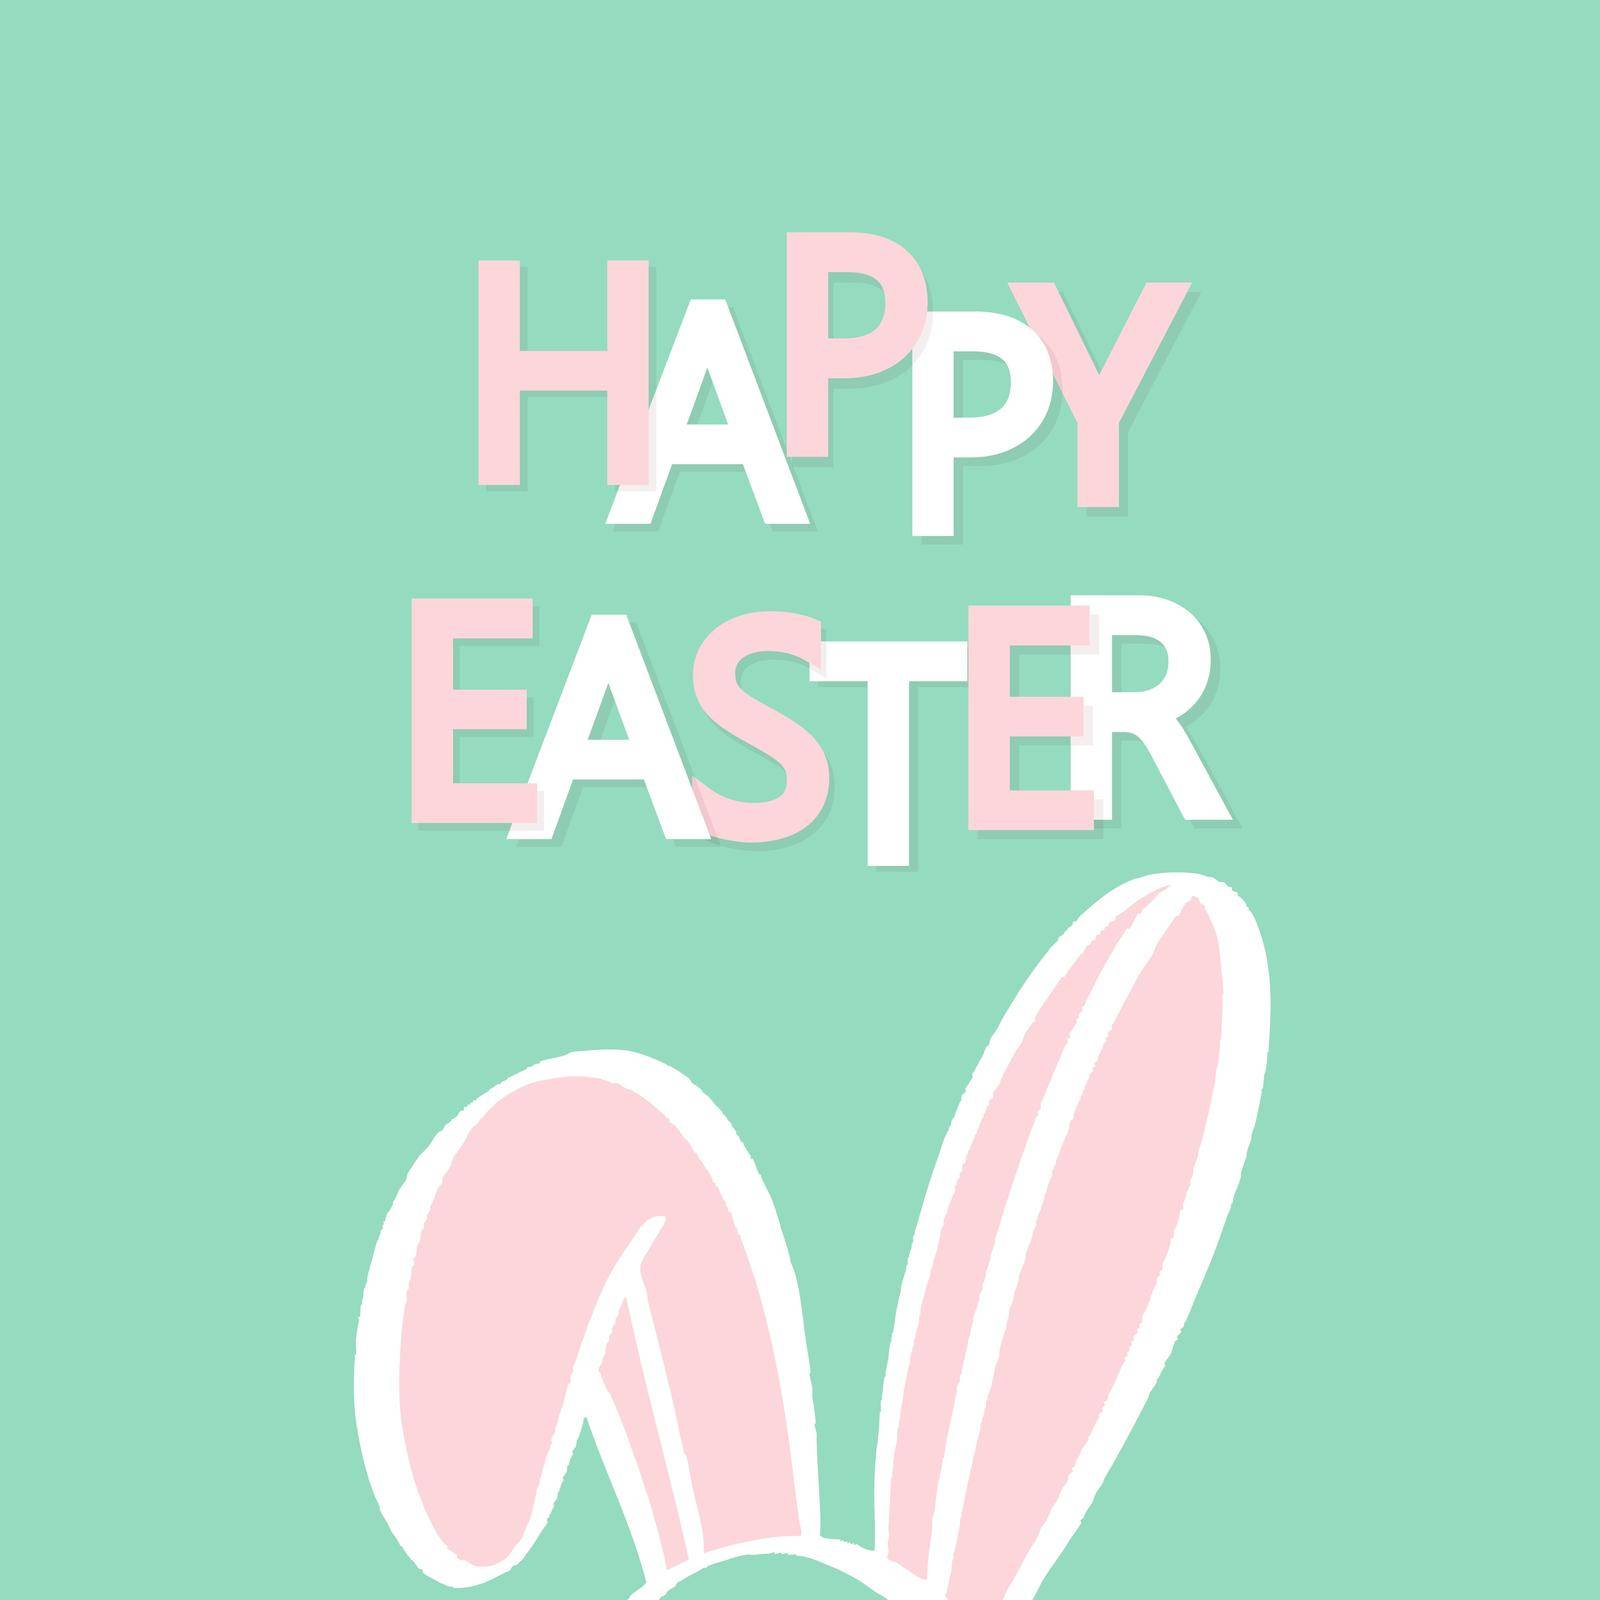 Happy Easter with bunny ears vector illustration